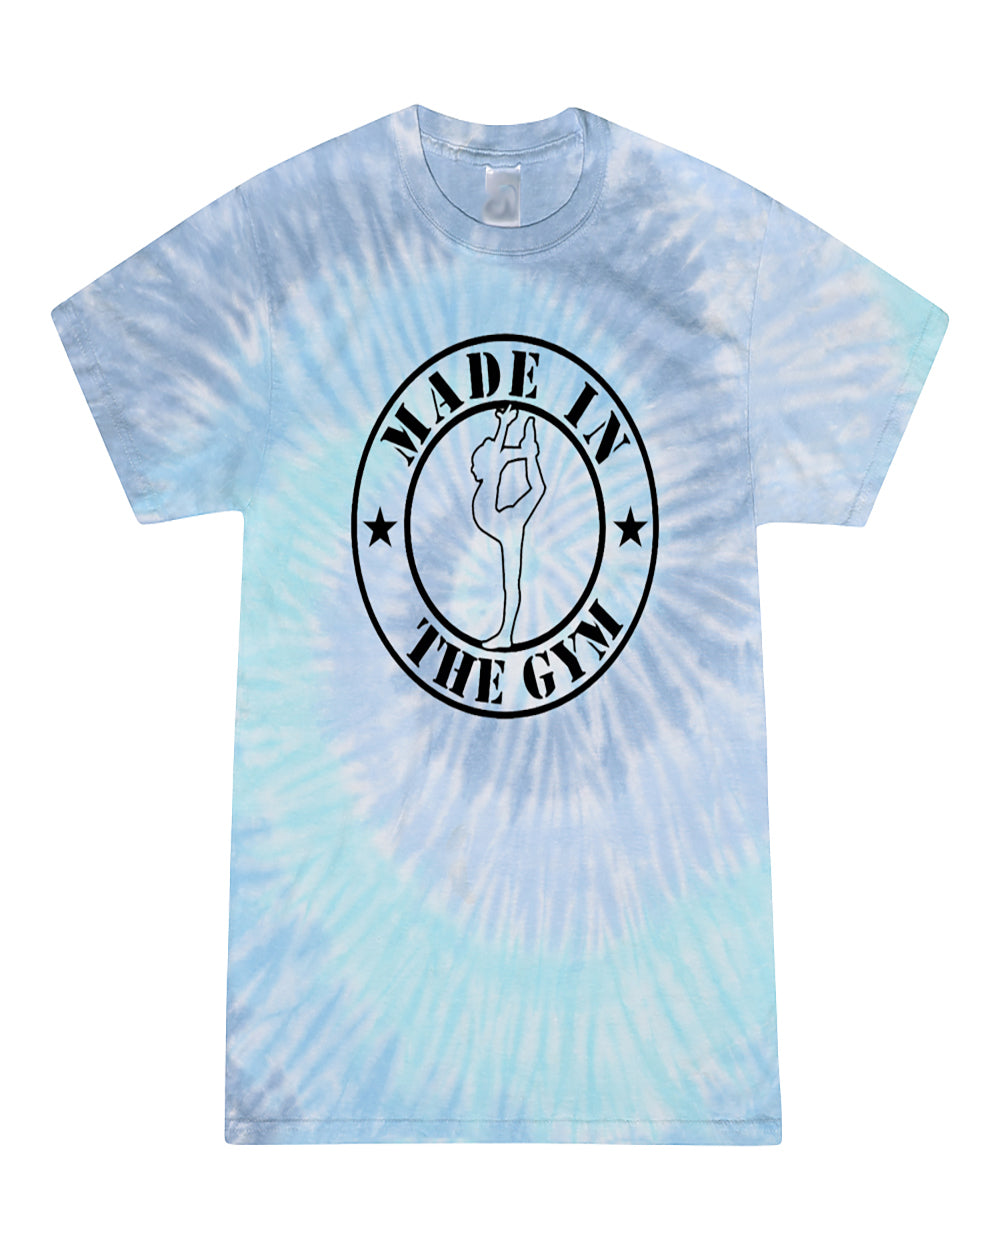 Made In The Gym Adult Tie Dye T-Shirt